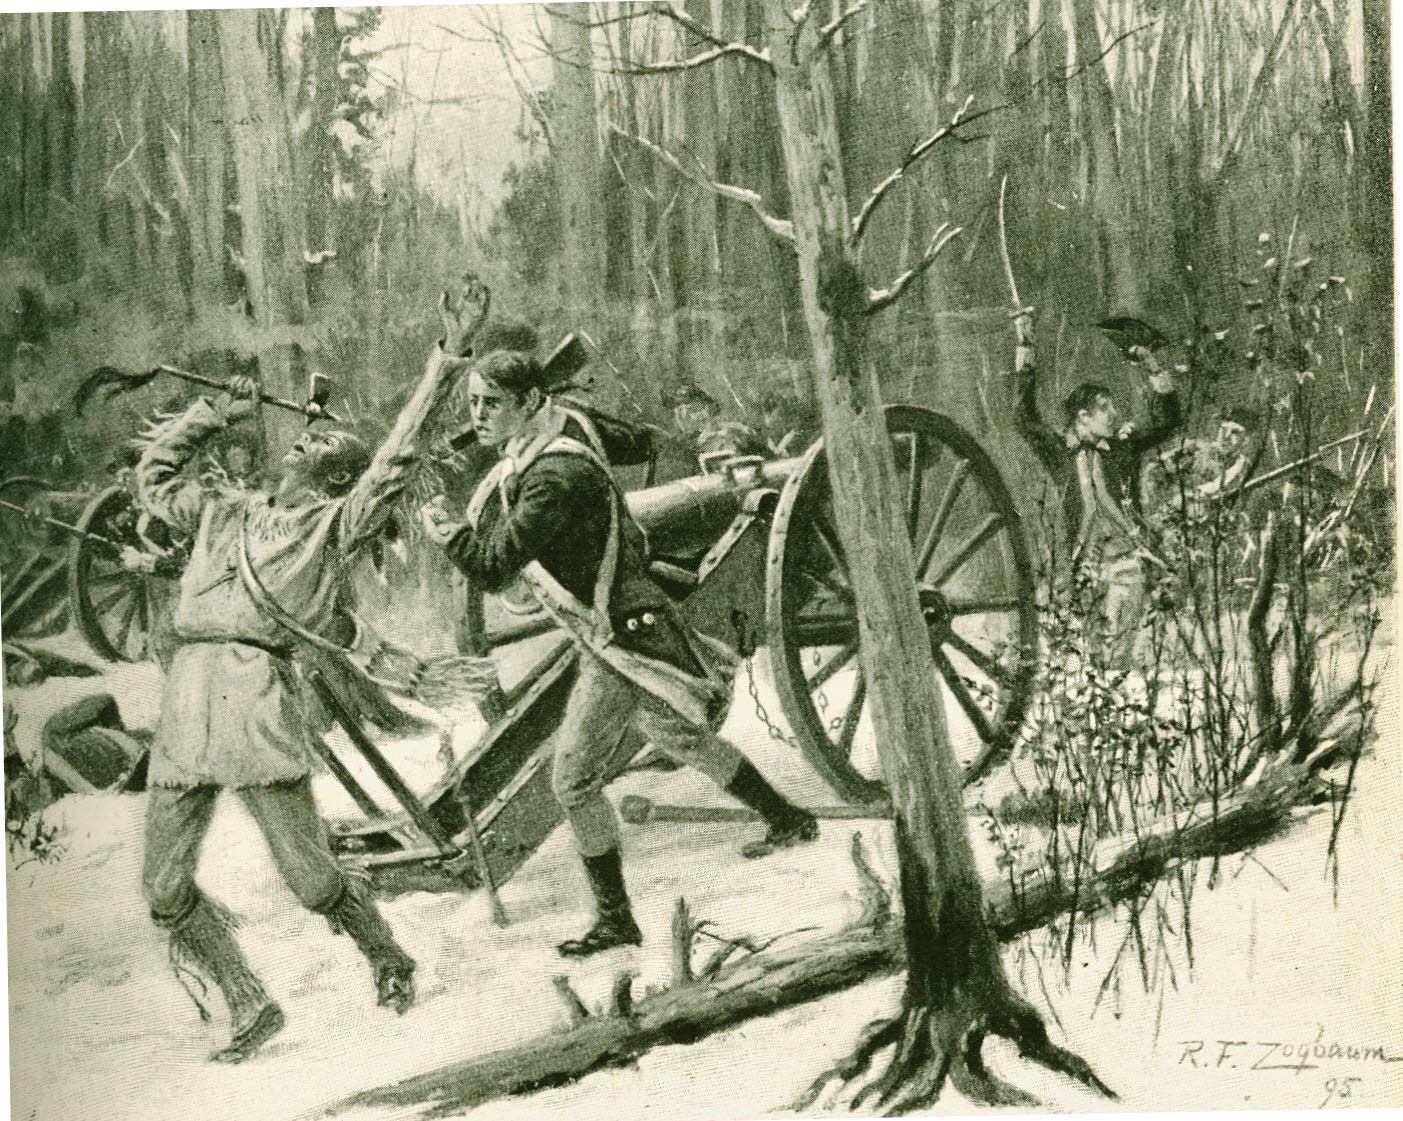 Fighting at the Battle of the Wabash